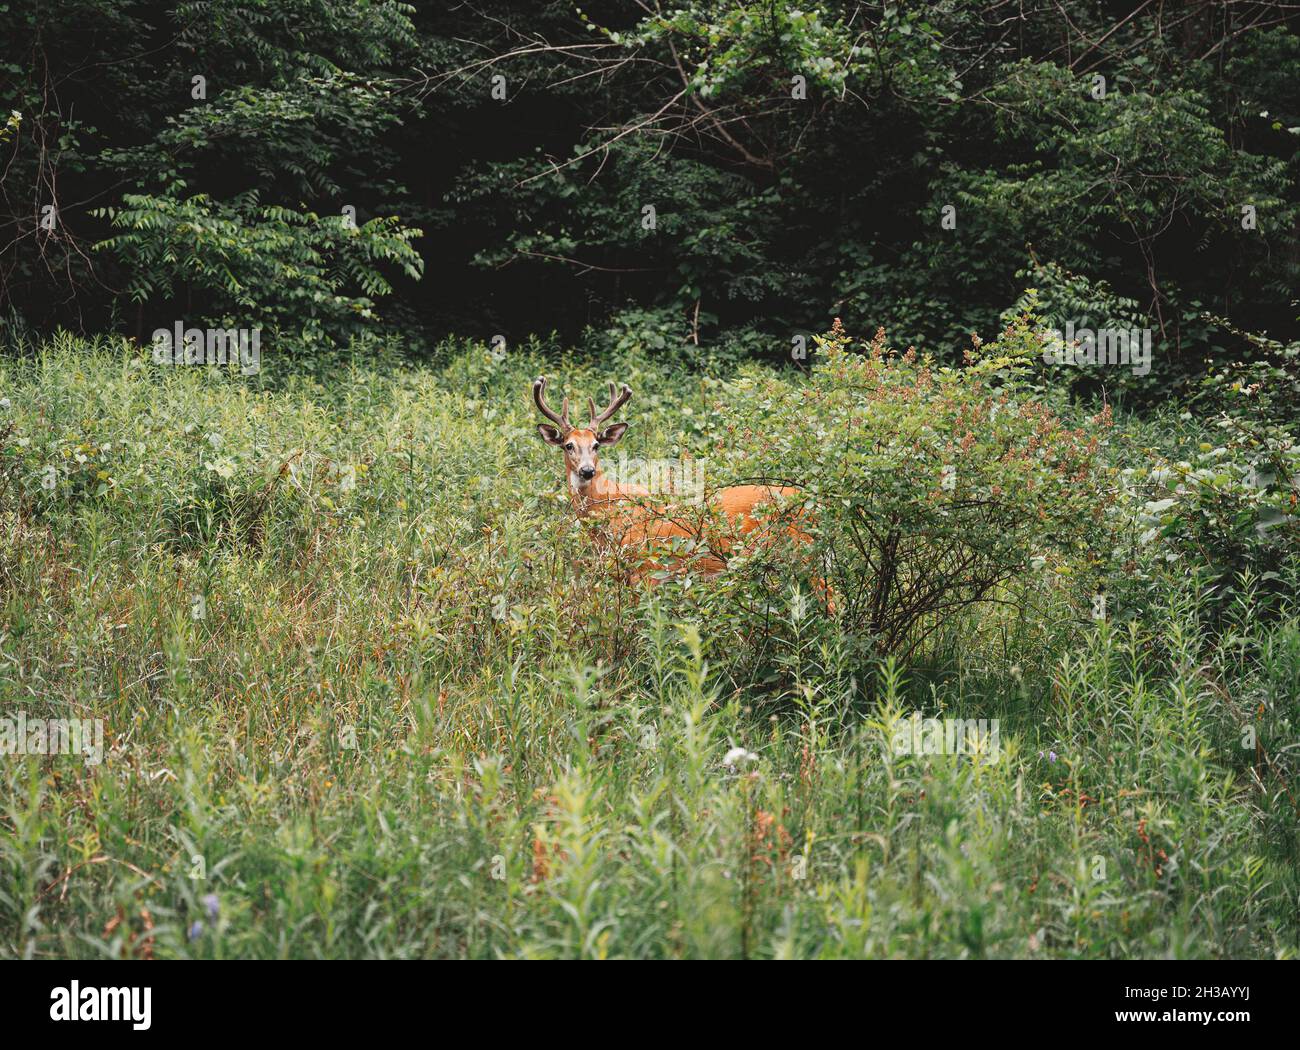 Deer hiding in the grassy field of the forest Stock Photo